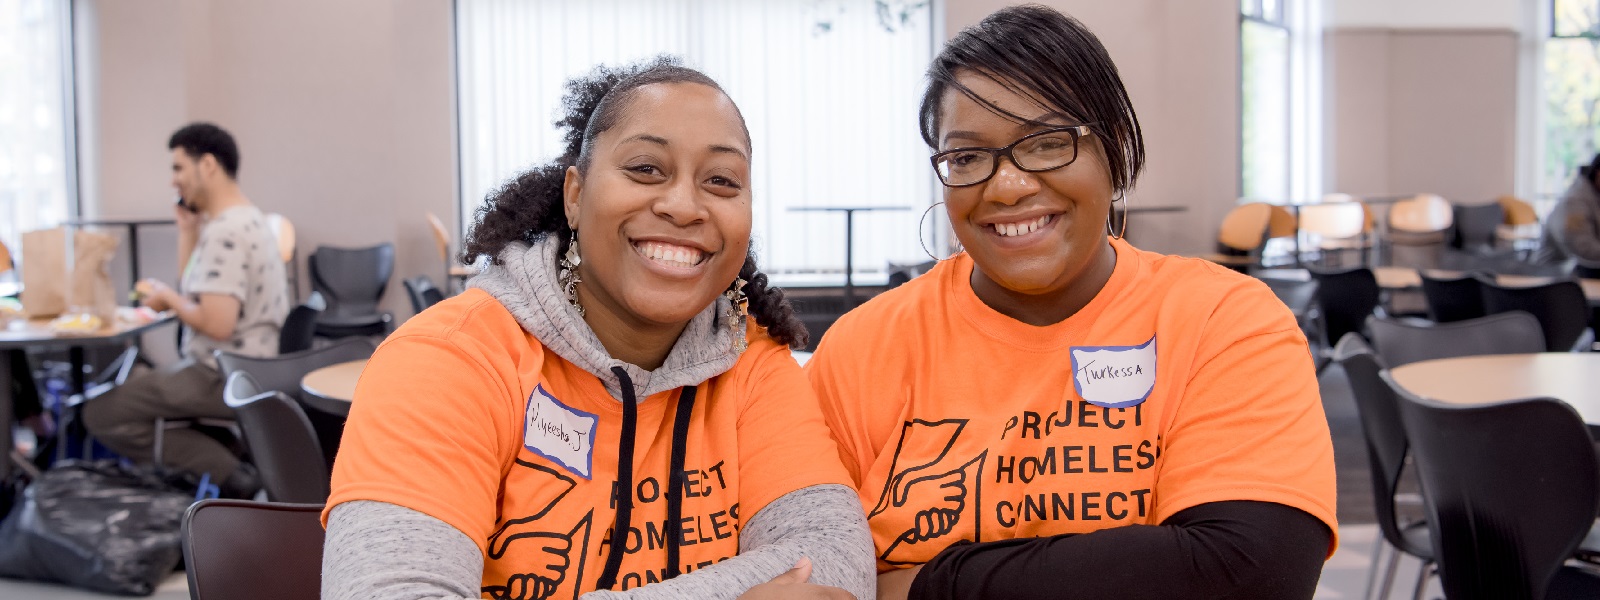 Volunteers at Project Homeless Connect